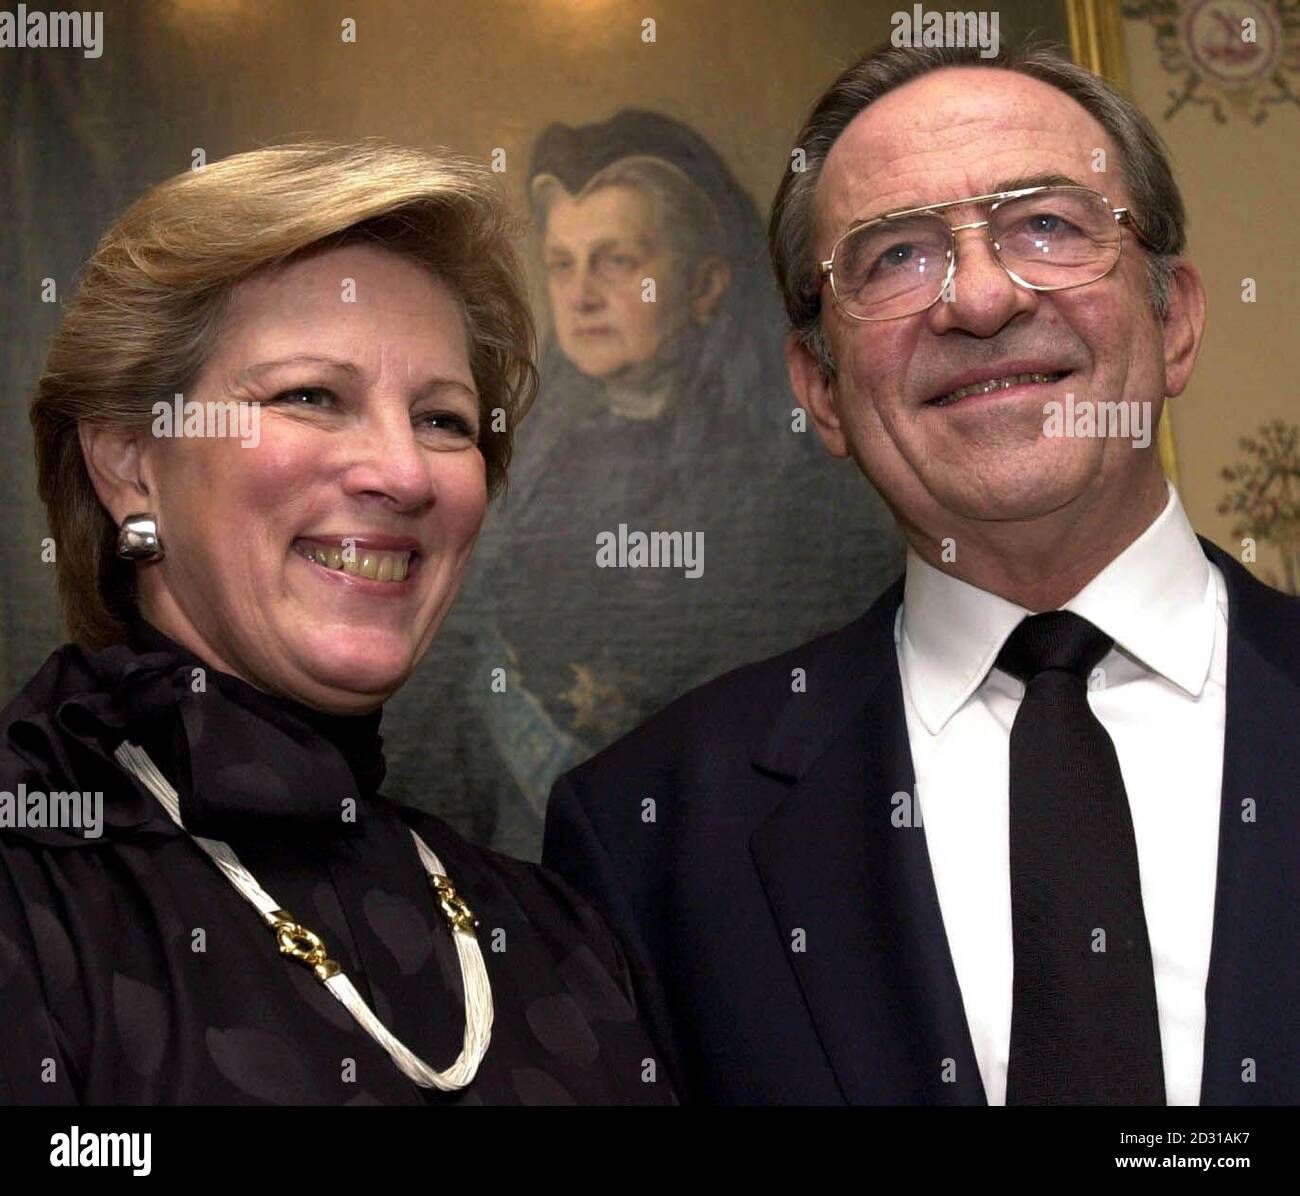 King Constantine of Greece with wife Queen Anne-Marie at their home in north London. The exiled king is 'extremely grateful' after the European Court of Human Rights ruled that Constantine's human rights had been violated when his property was seized in Greece.   *... They are in front of a portrait of his Great Grandmother Queen Olga who is also the Grandmother of Britain's Prince Philip. Stock Photo